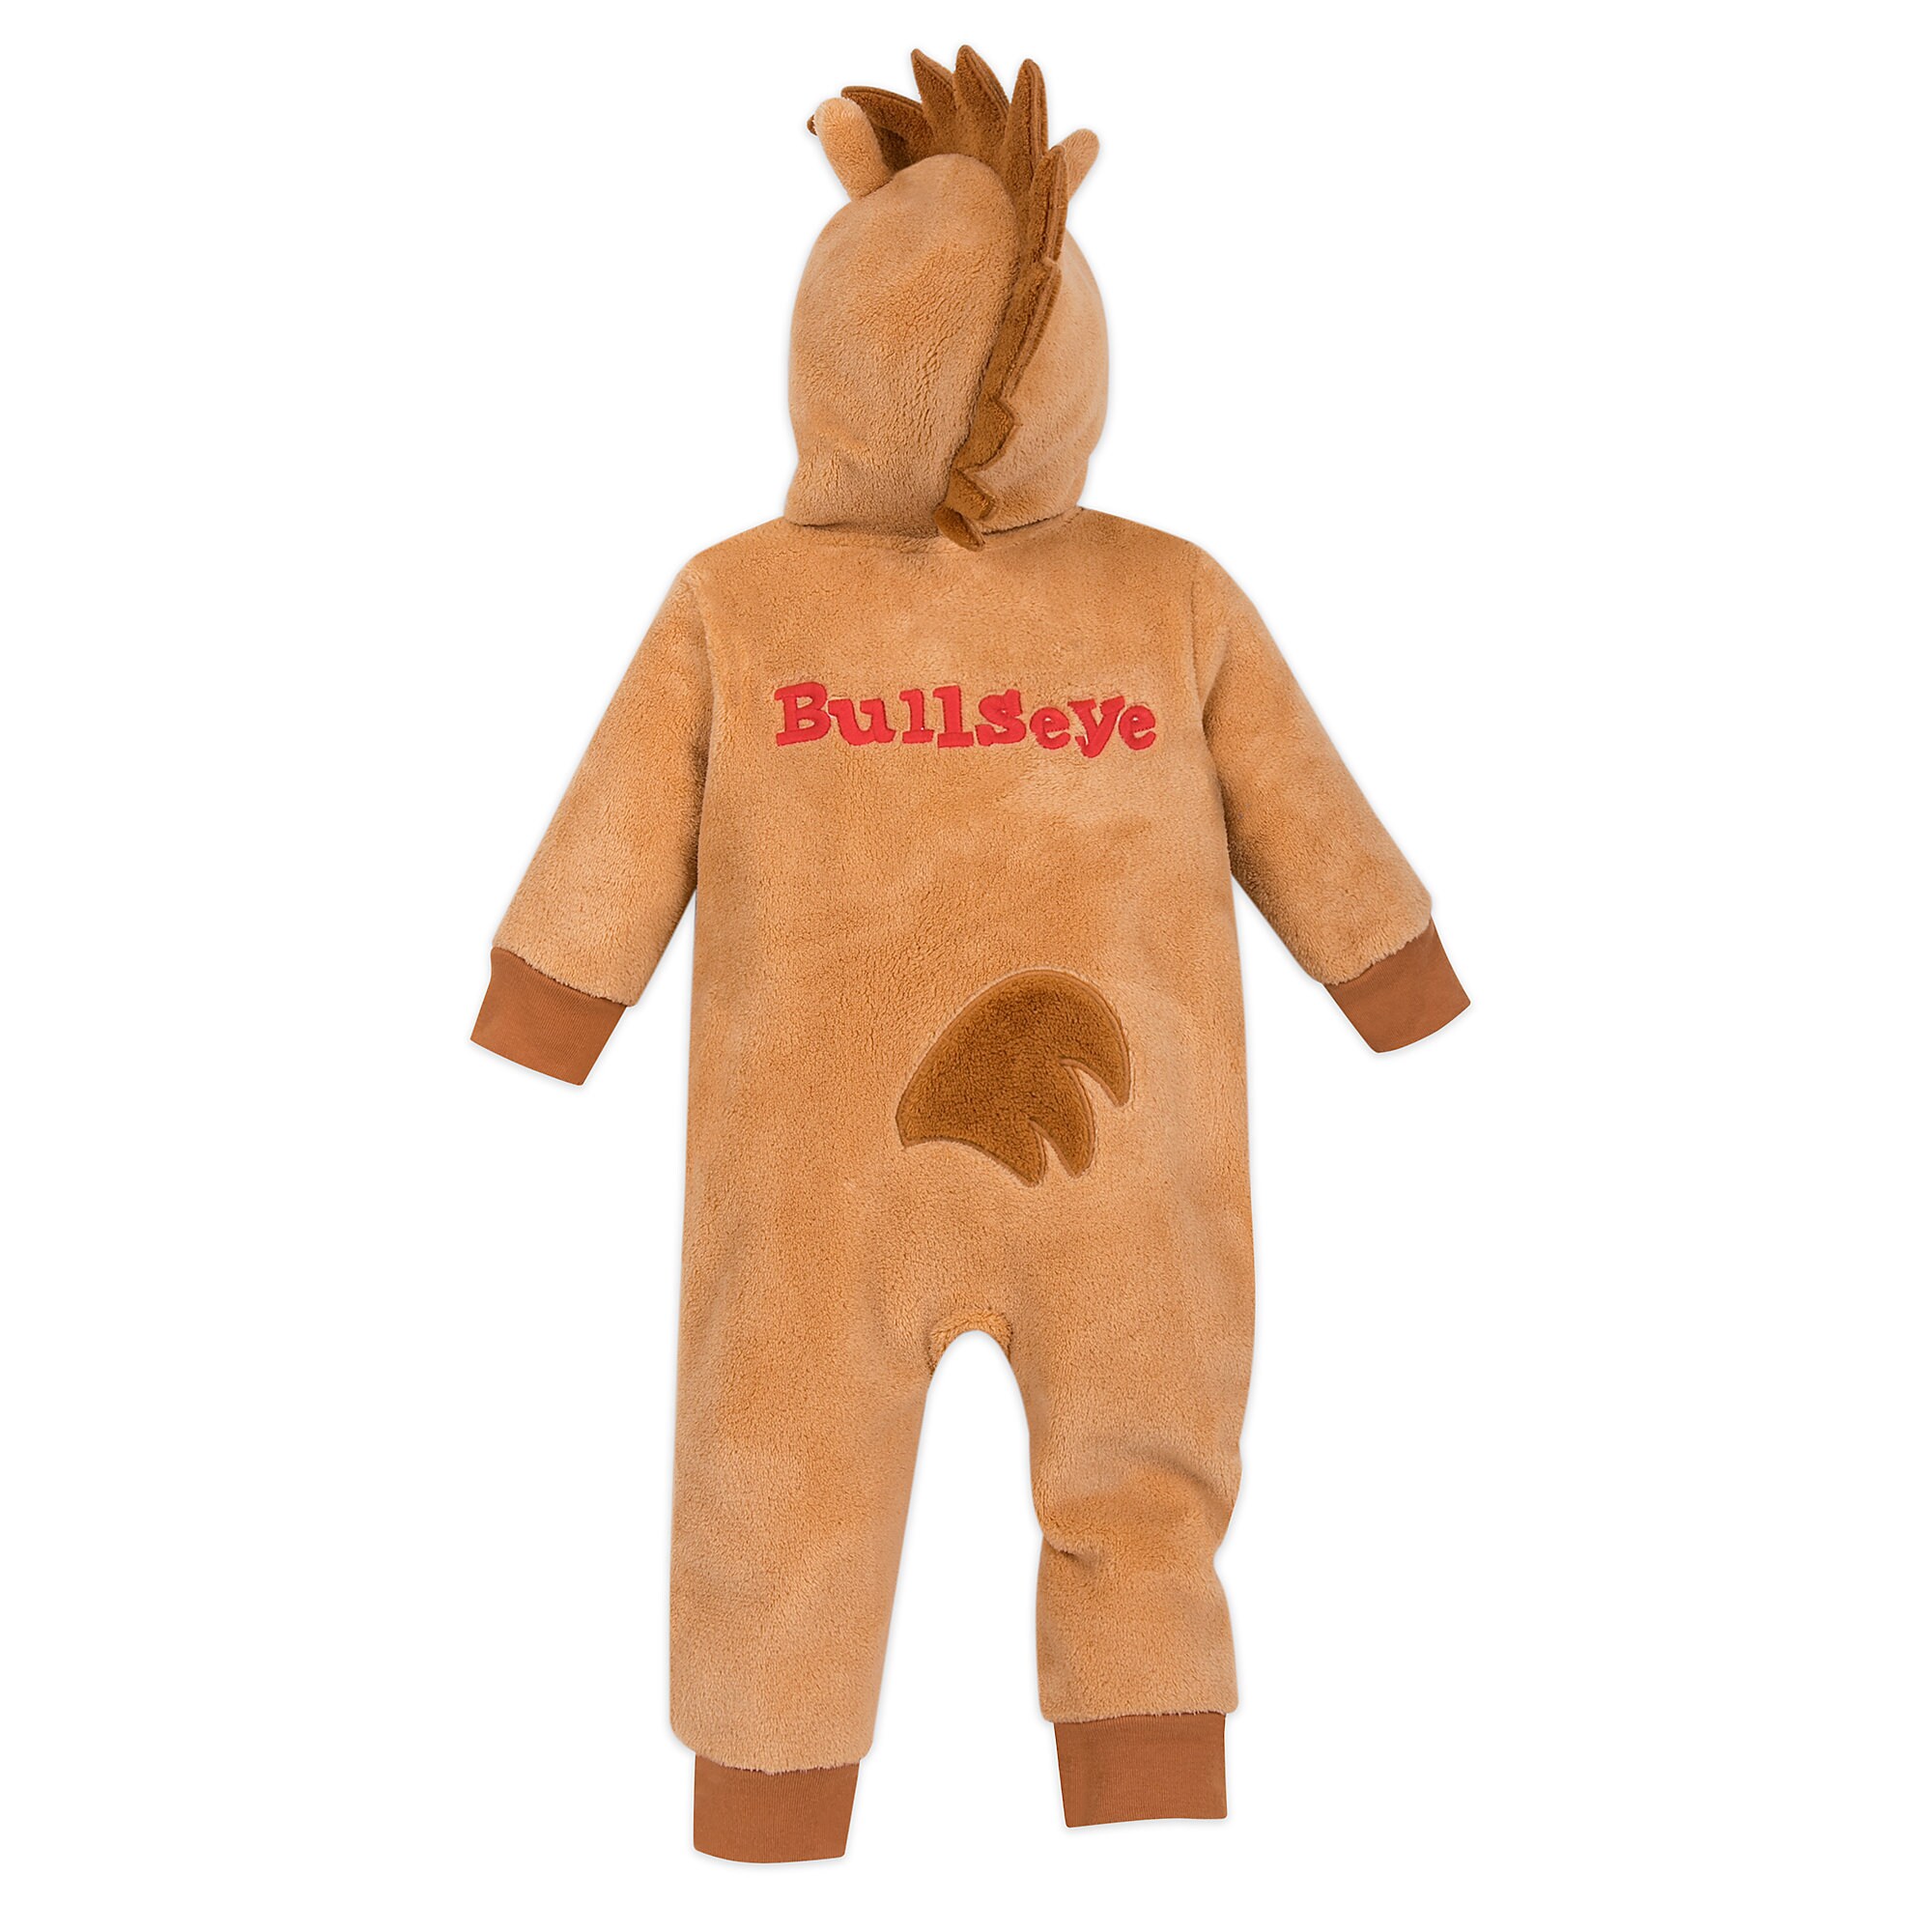 Bullseye Costume Romper for Baby - Toy Story - Personalized